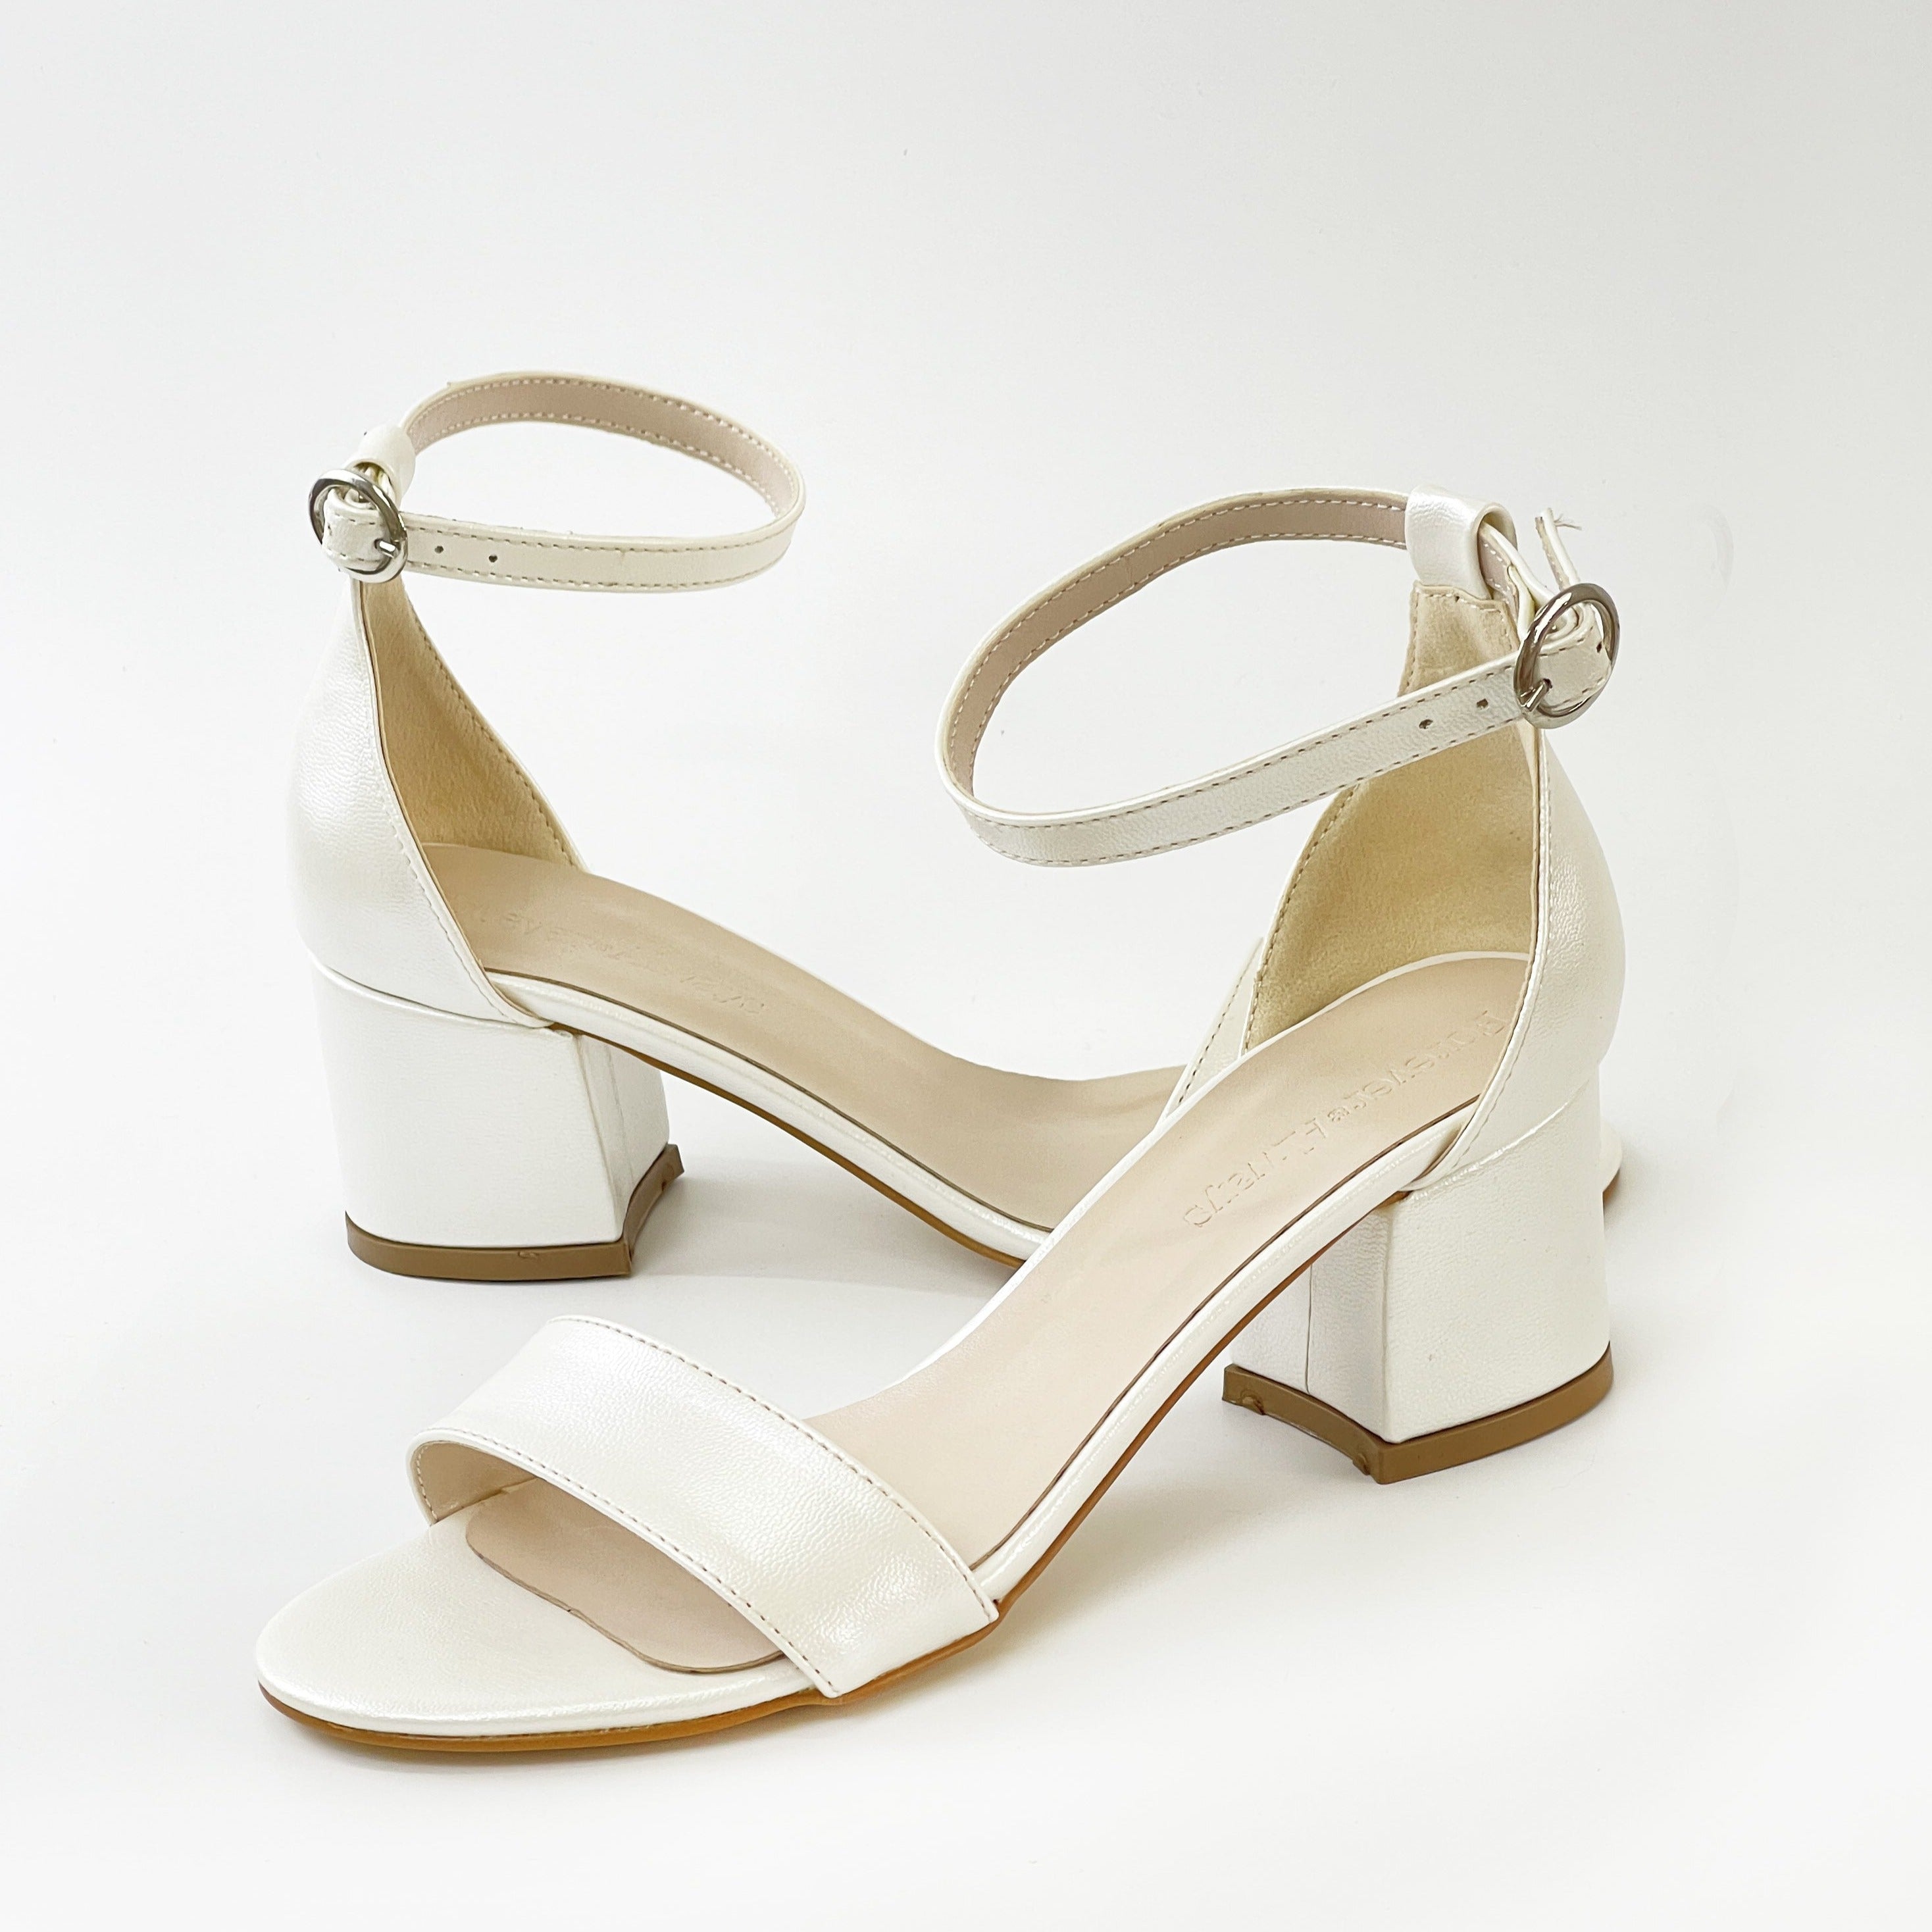 Ivory white sandals, White sandals in ivory, Stylish ivory white shoes, Chic white sandals, Trendy ivory white footwear, Fashionable white sandals, Elegant ivory white heels, Classic white sandals, Comfortable ivory white shoes, Ivory white sandals for women.